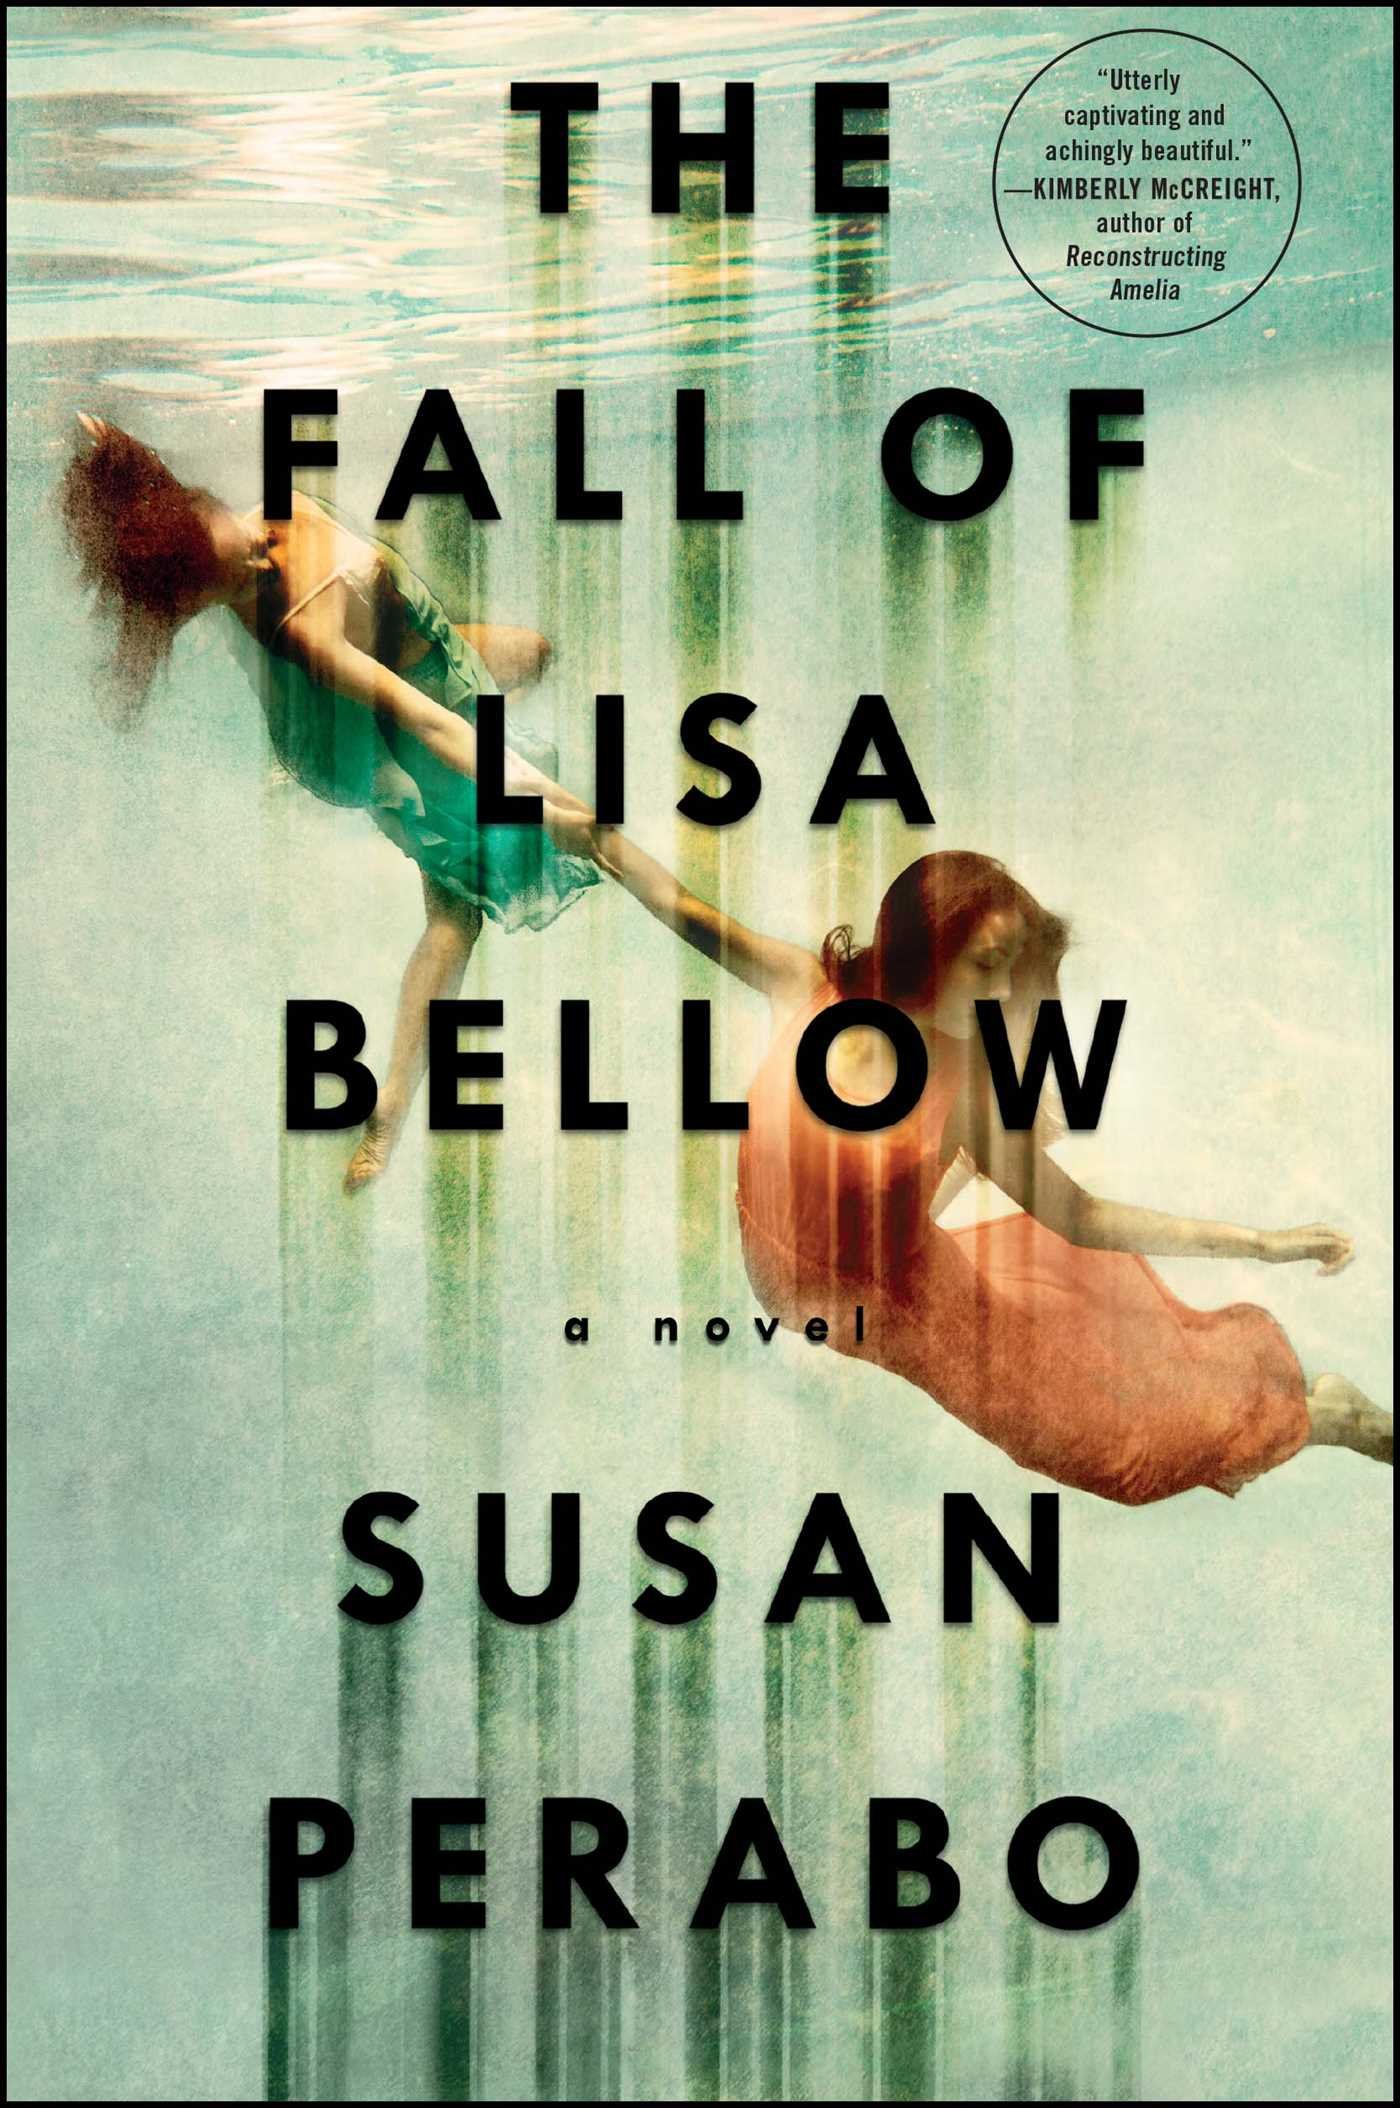 The Fall of Lisa Bellow